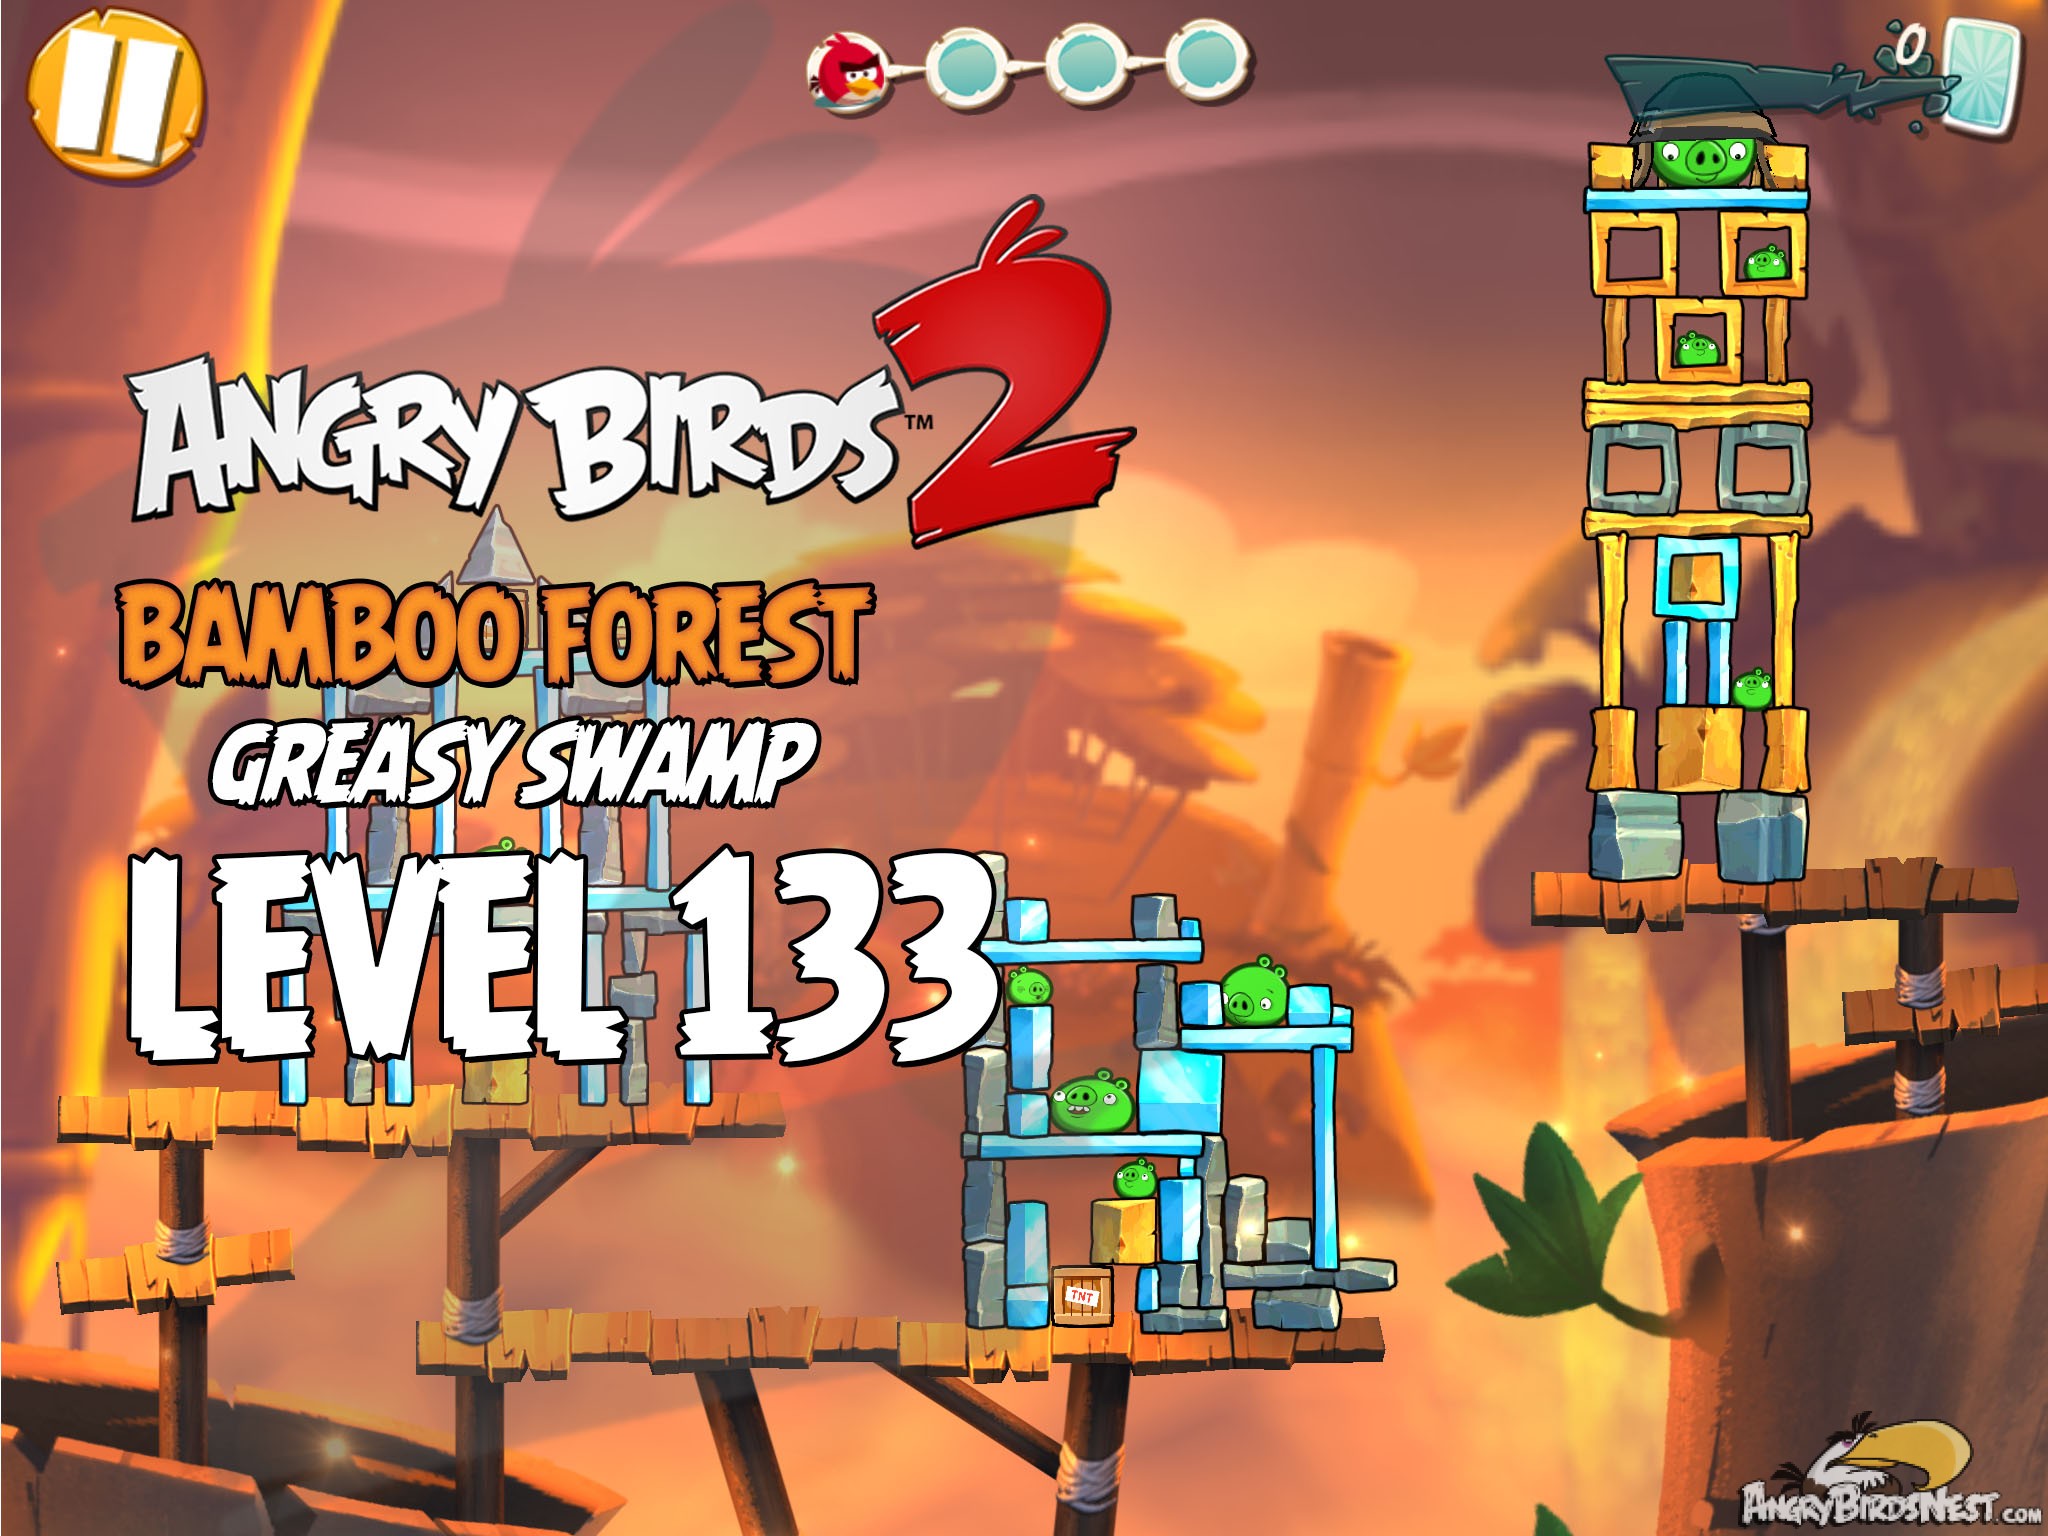 Angry Birds 2 Bamboo Forest Greasy Swamp Level 133